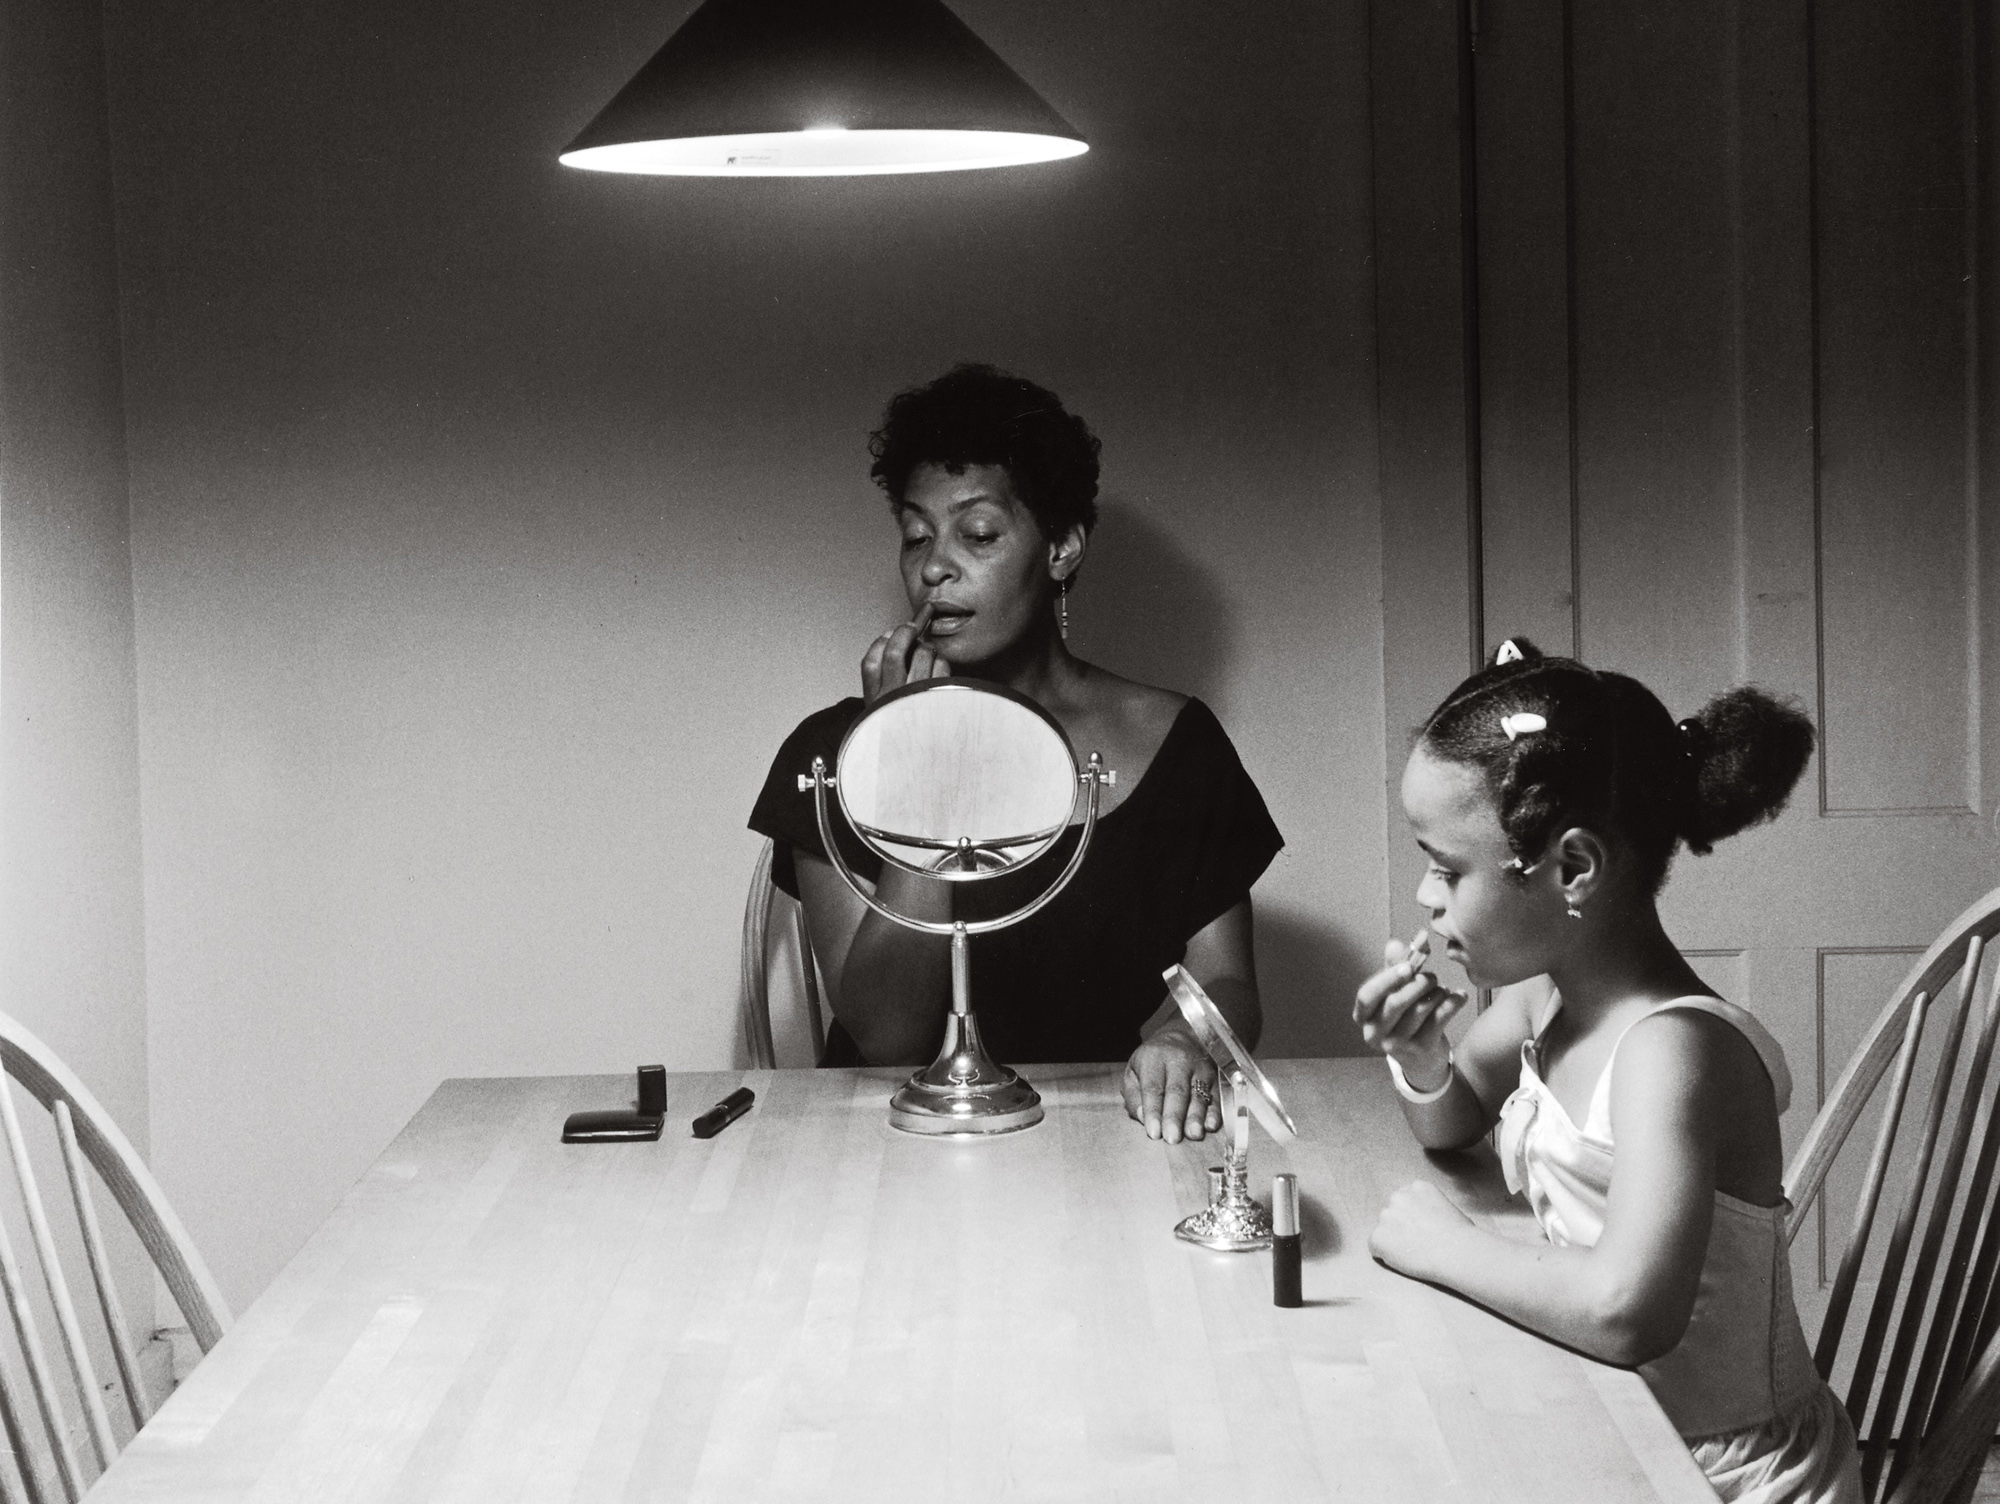 all images from kitchen table series by carrie mae weems